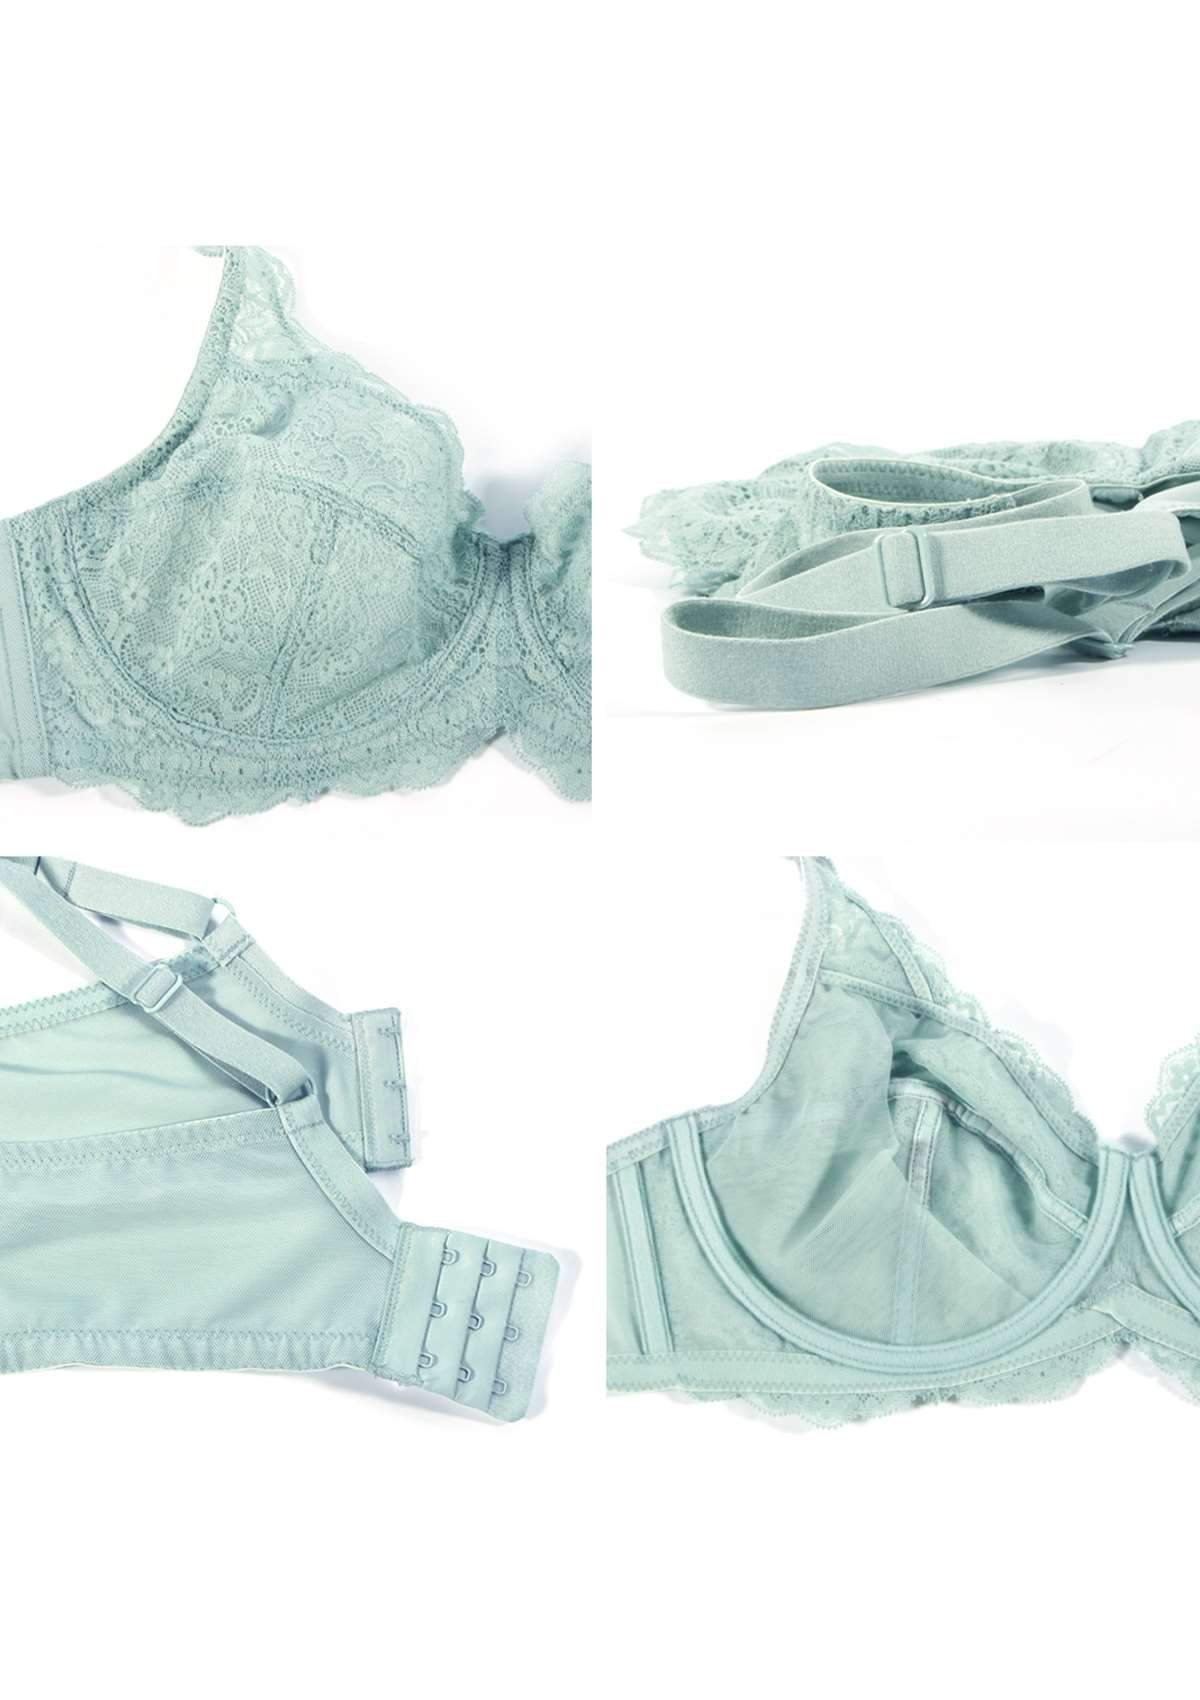 HSIA All-Over Floral Lace: Best Bra For Elderly With Sagging Breasts - Pewter Blue / 38 / DD/E